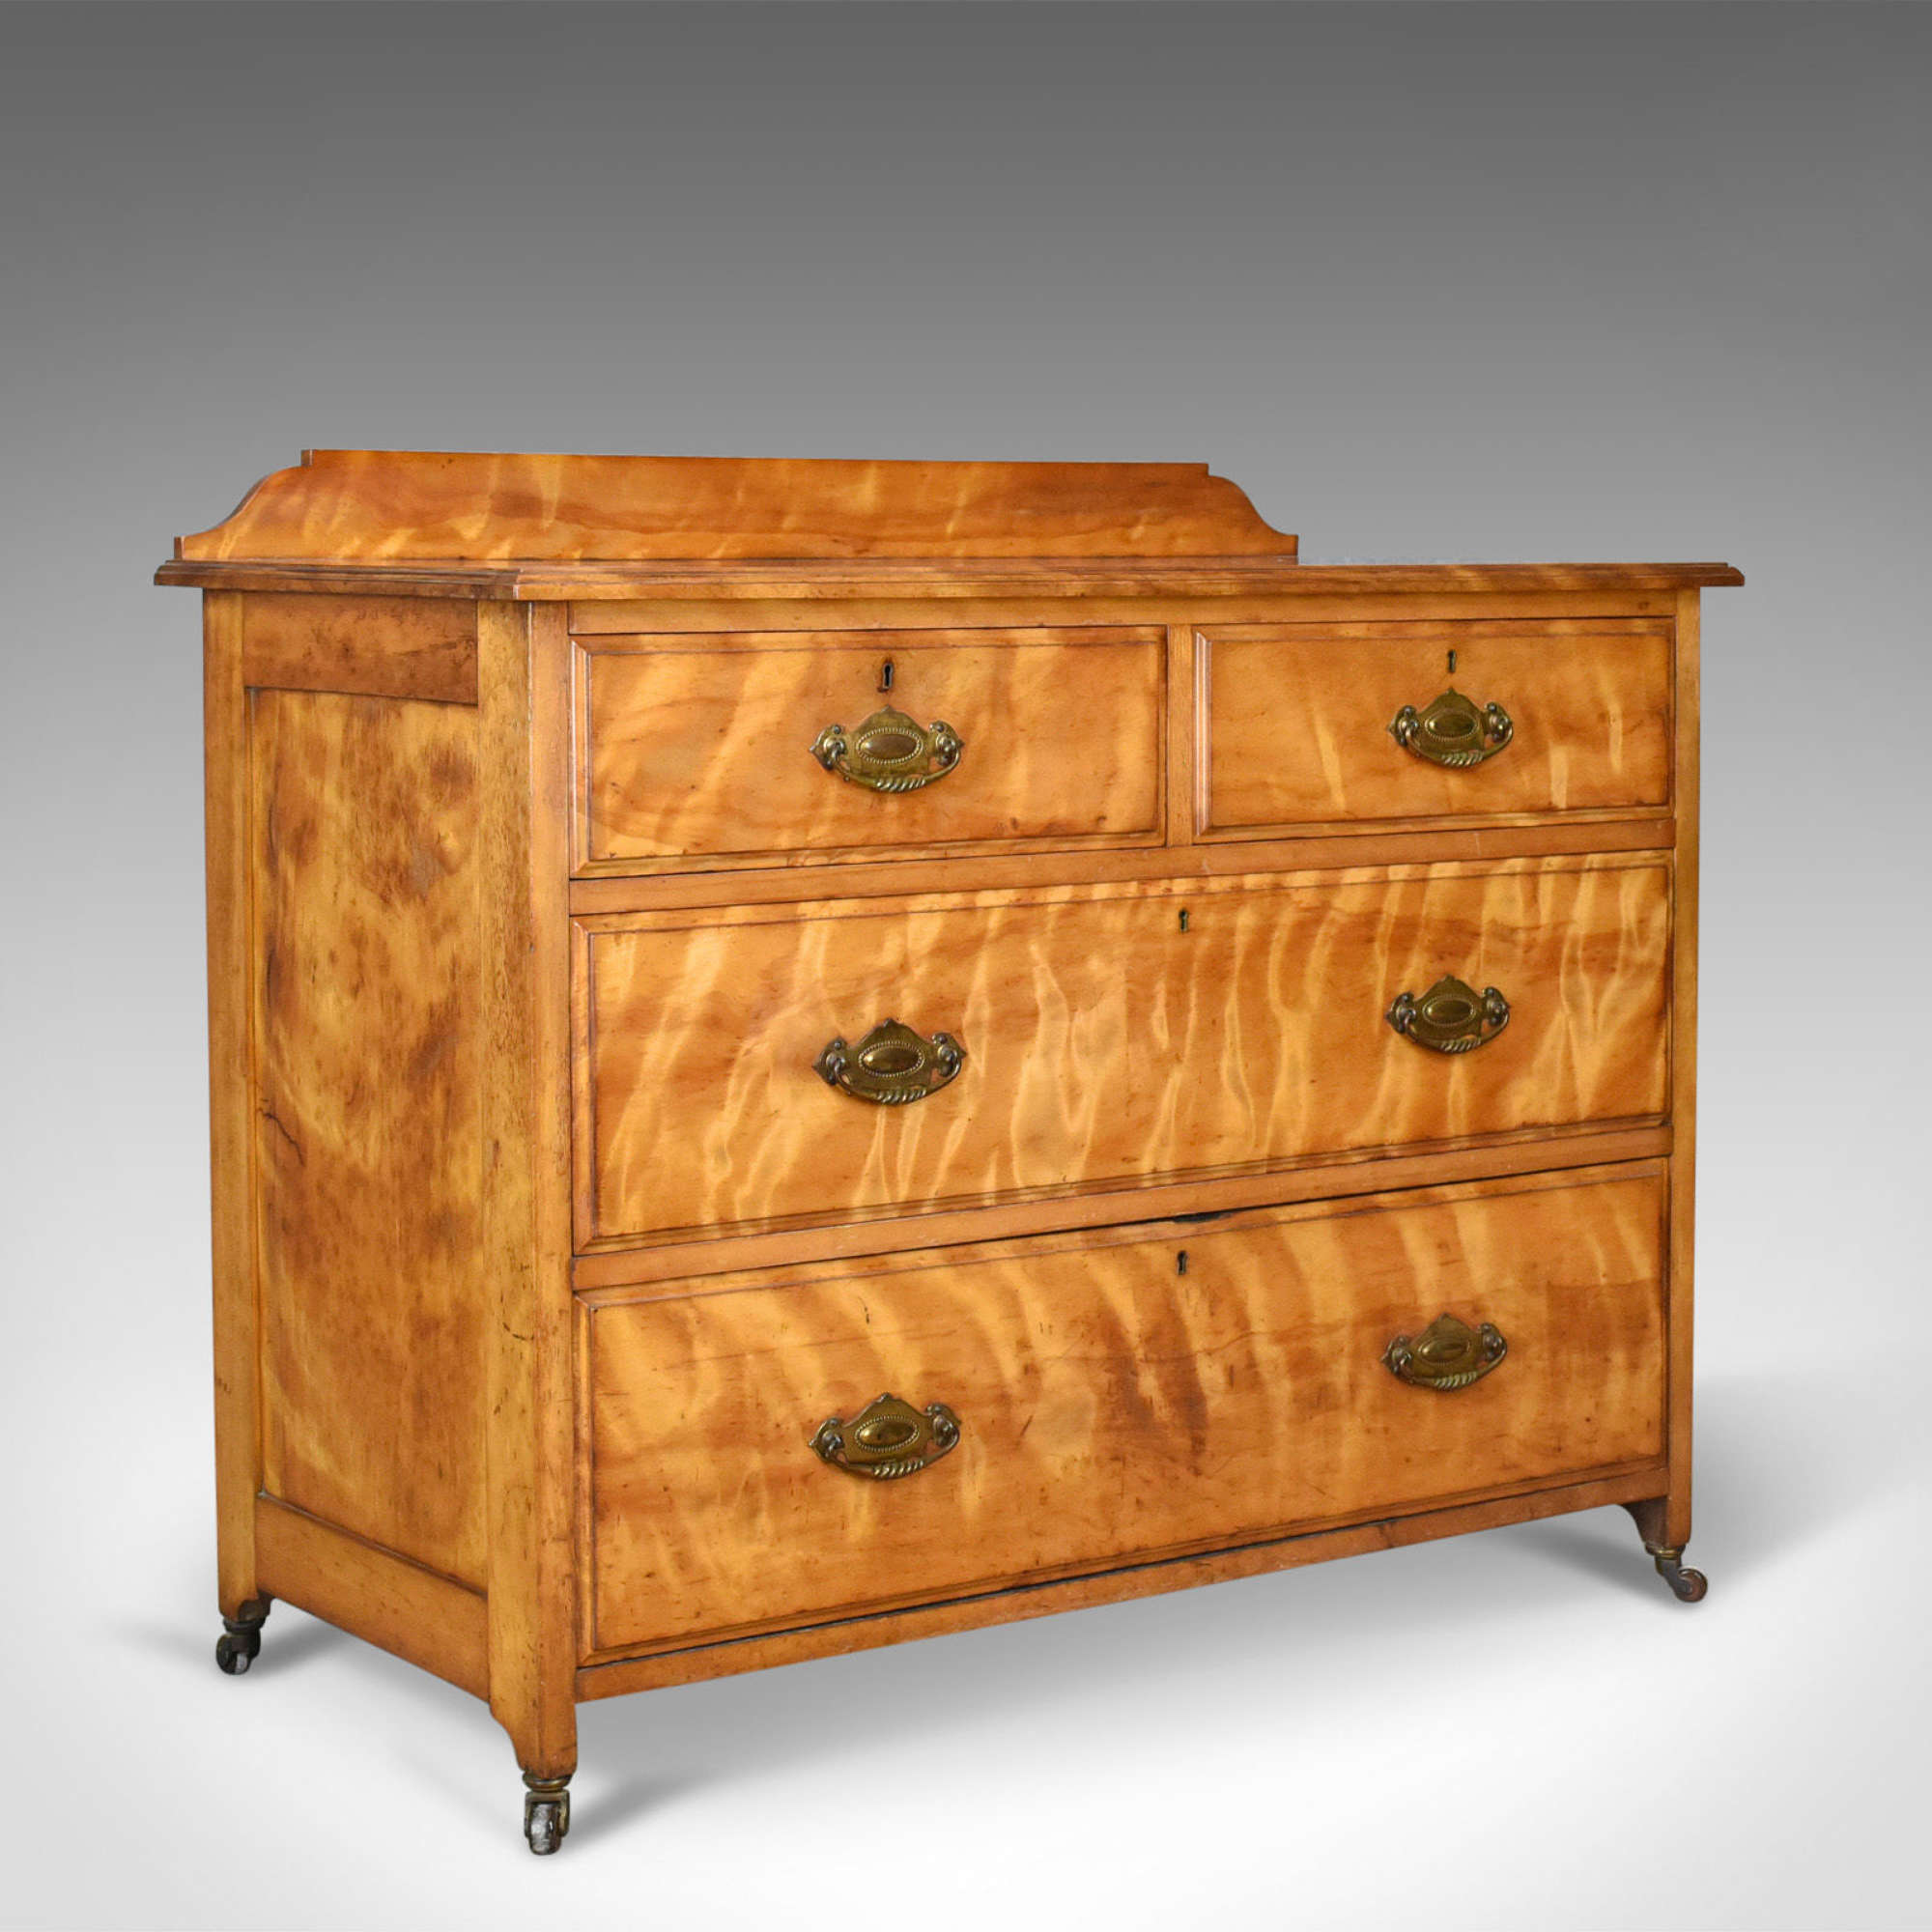 Antique Chest Of Drawers, Satinwood, English, Victorian Bedroom C.1900